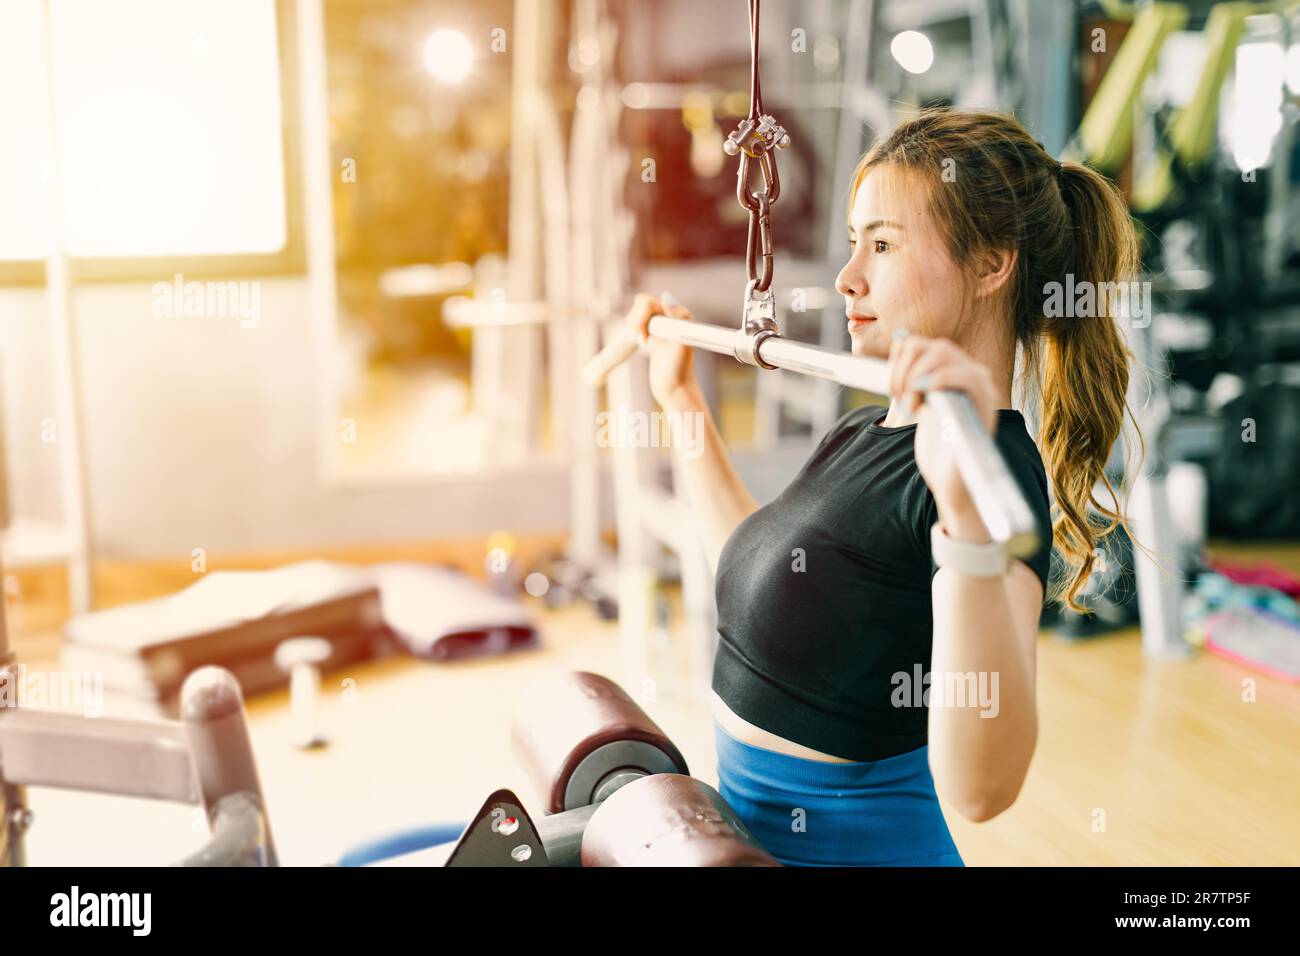 woman arms shoulder core muscle strength workout training lat pull down in fitness sport club Stock Photo